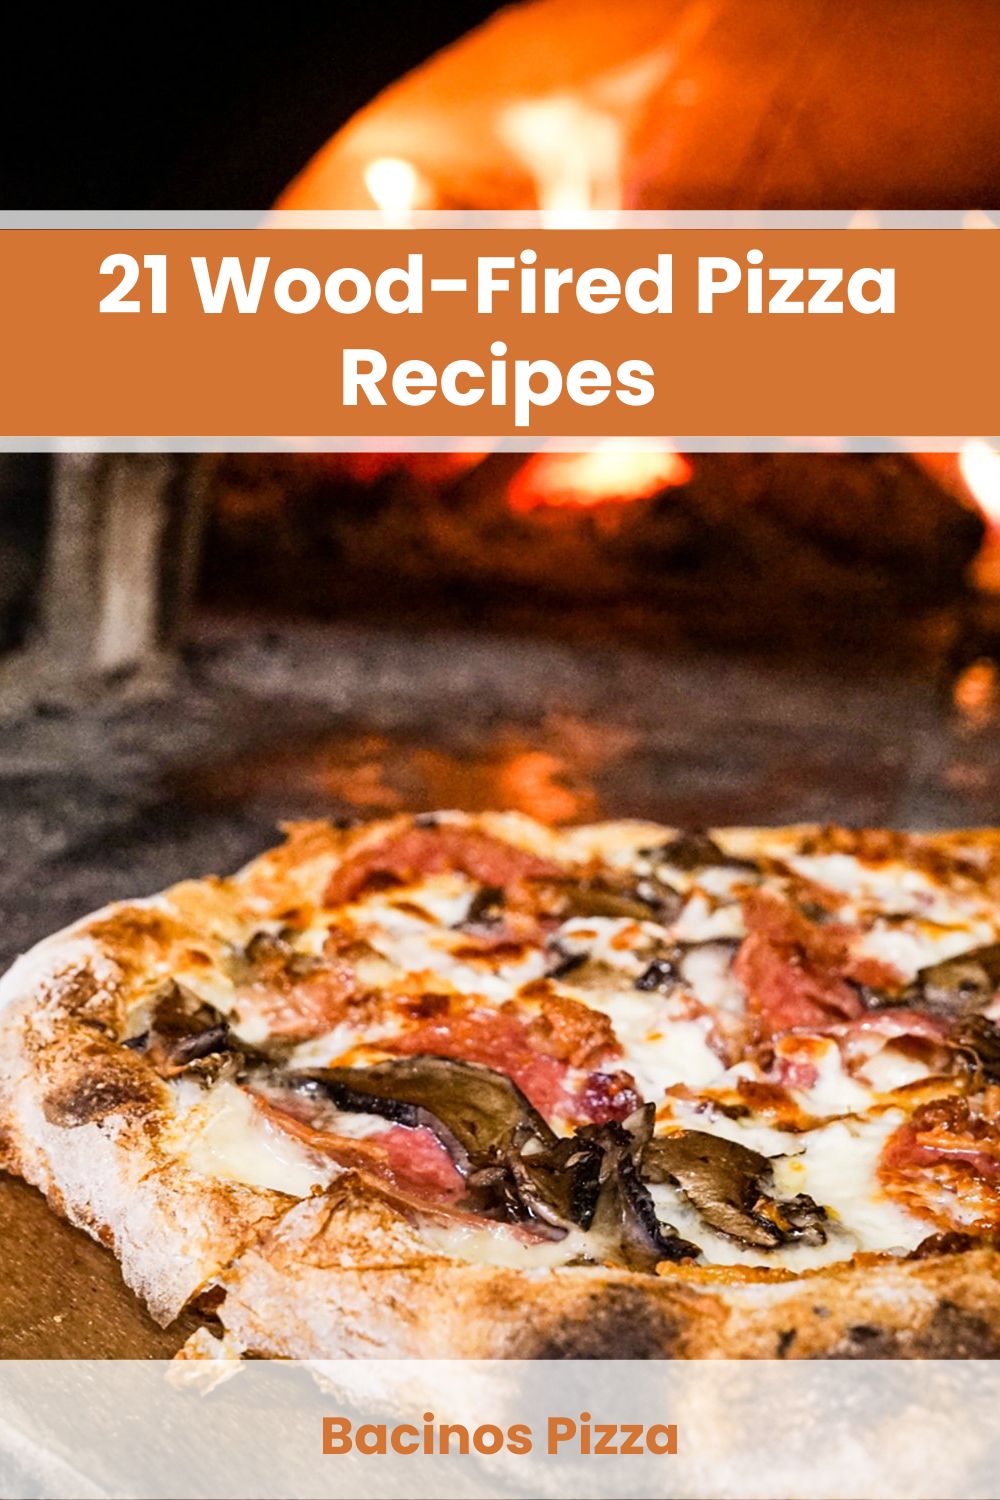 Wood-Fired Pizza Recipes